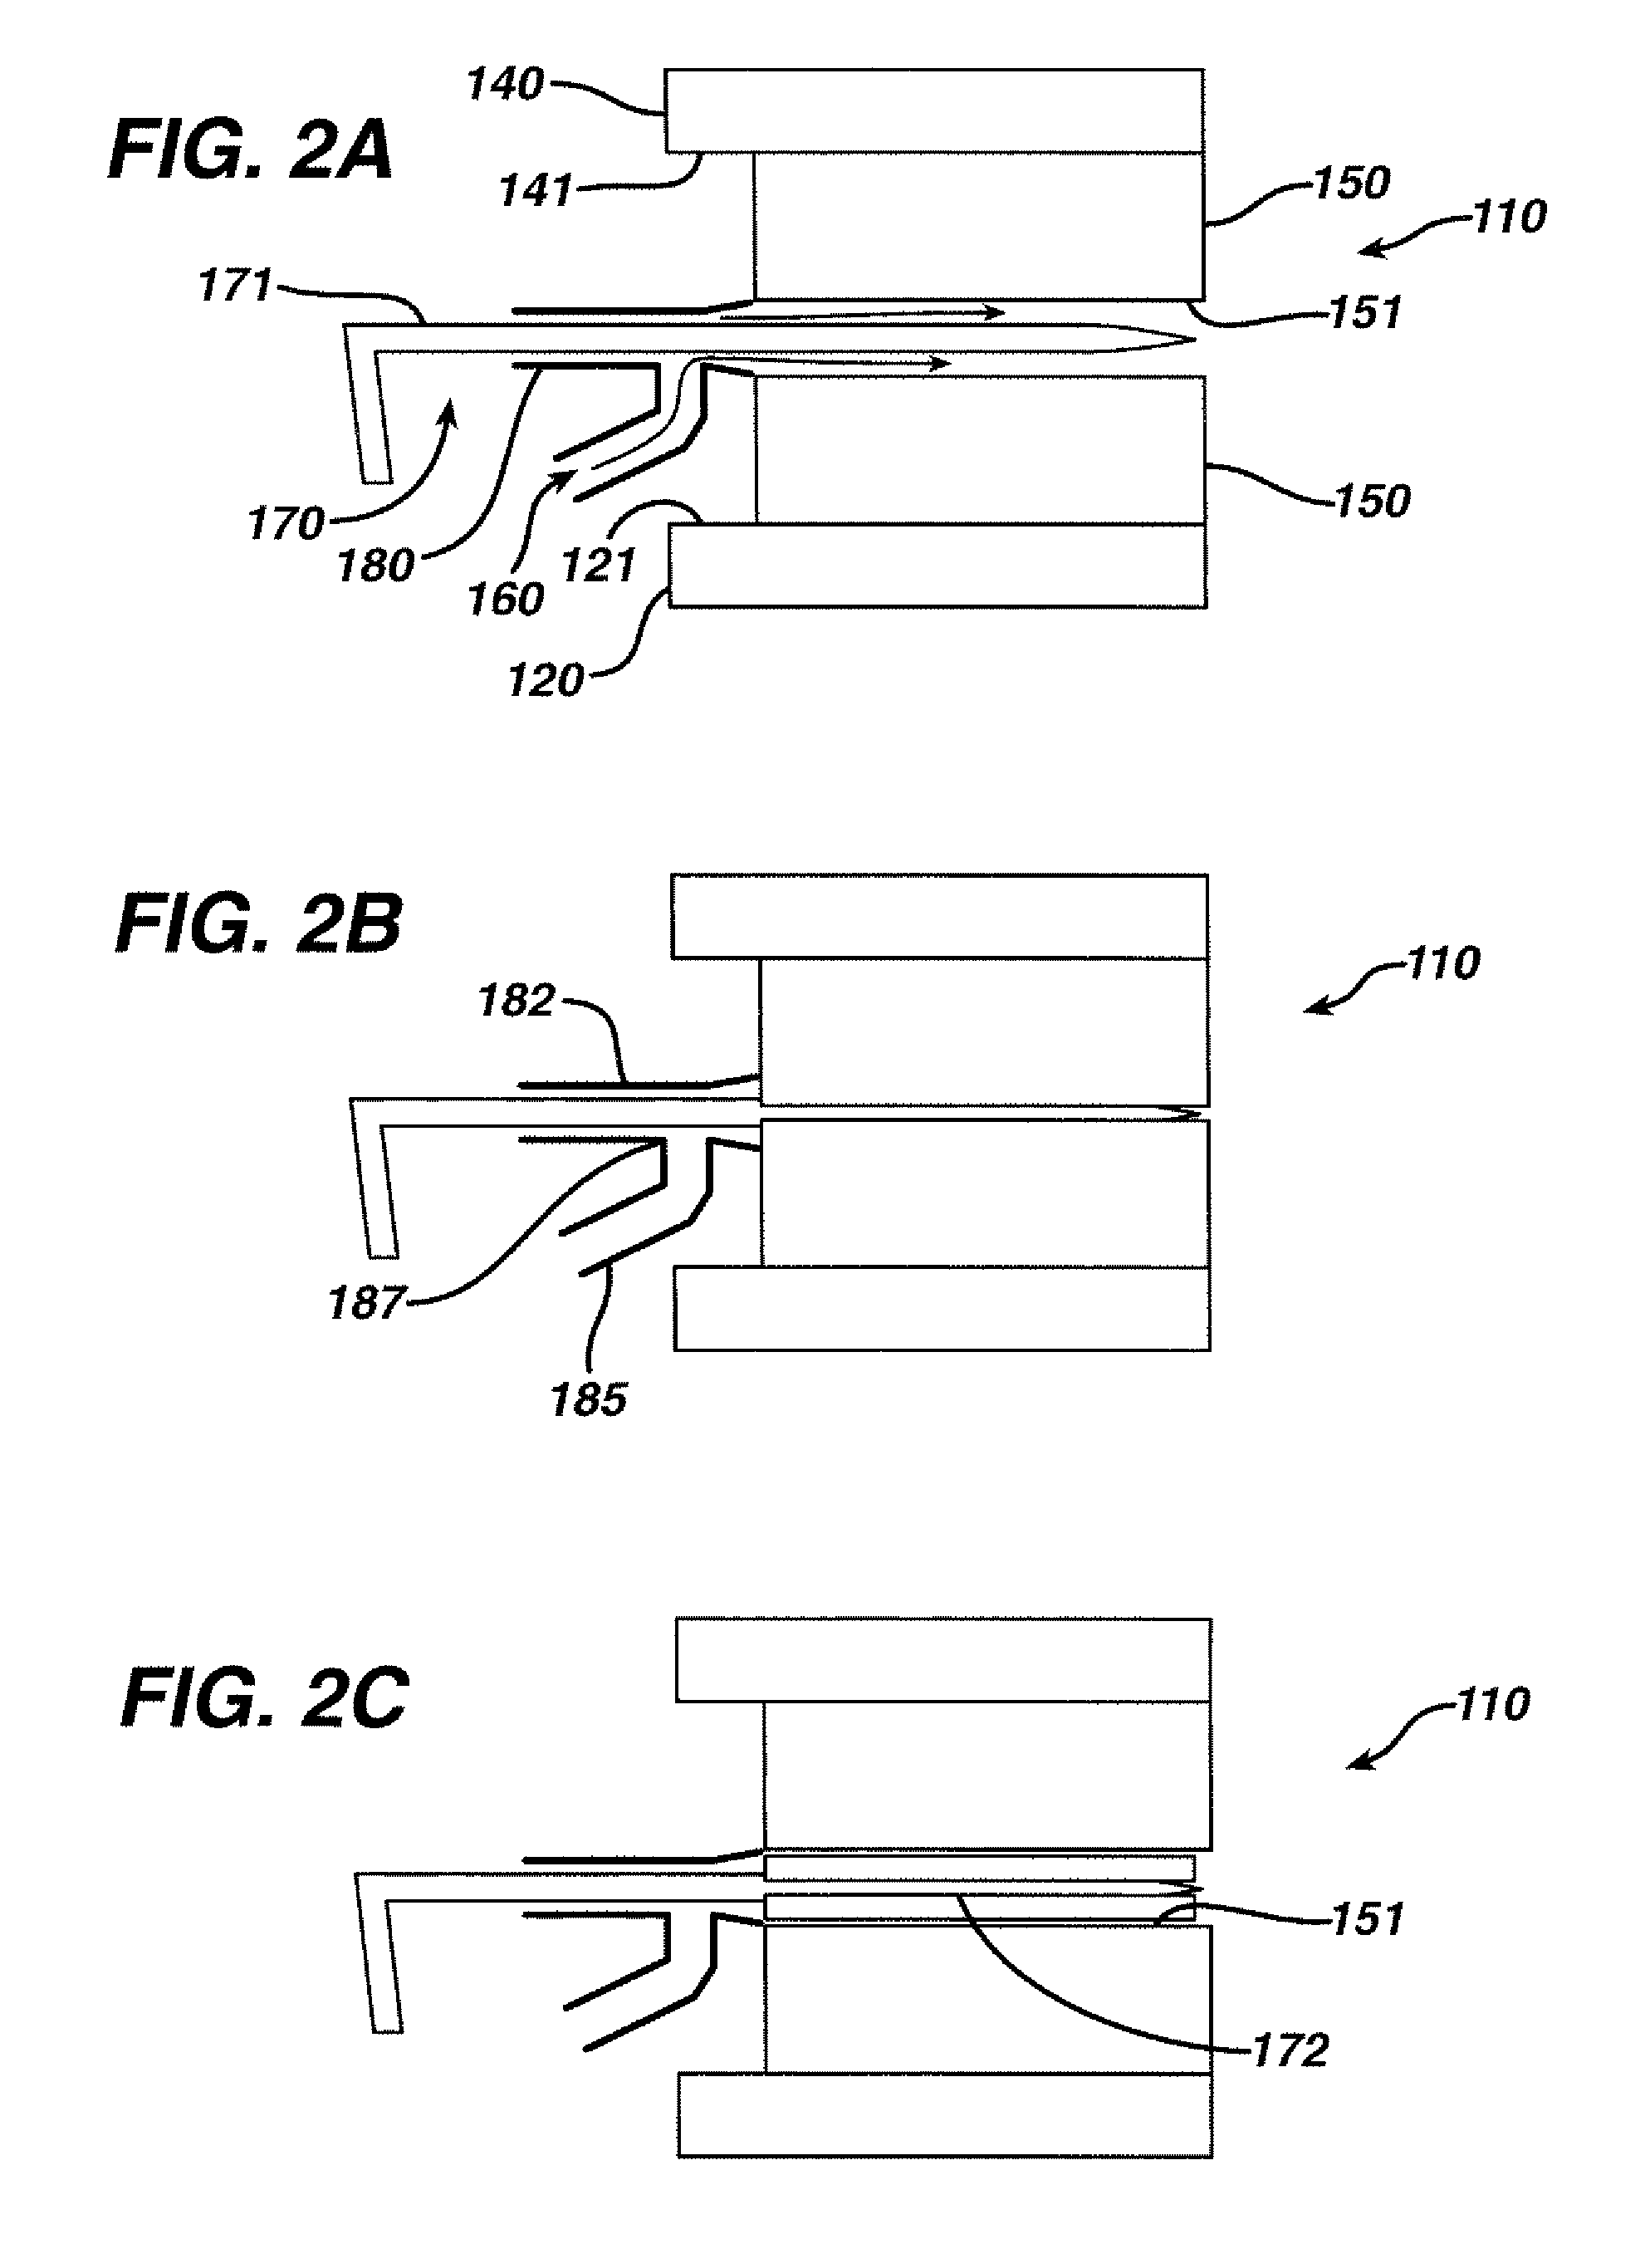 Thermal forming of refractory alloy surgical needles and fixture and apparatus